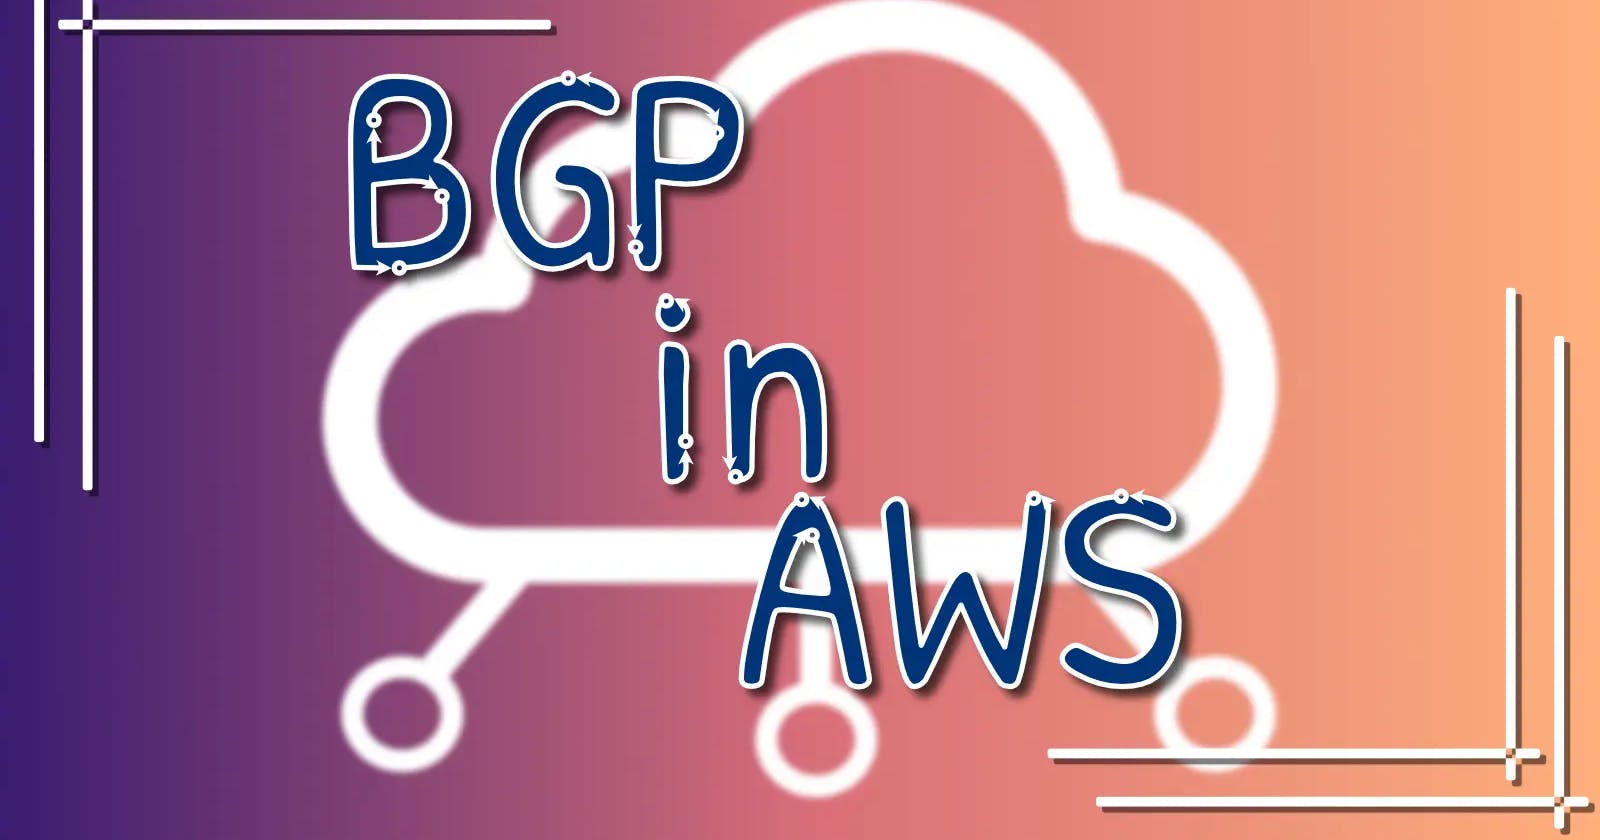 BGP in AWS